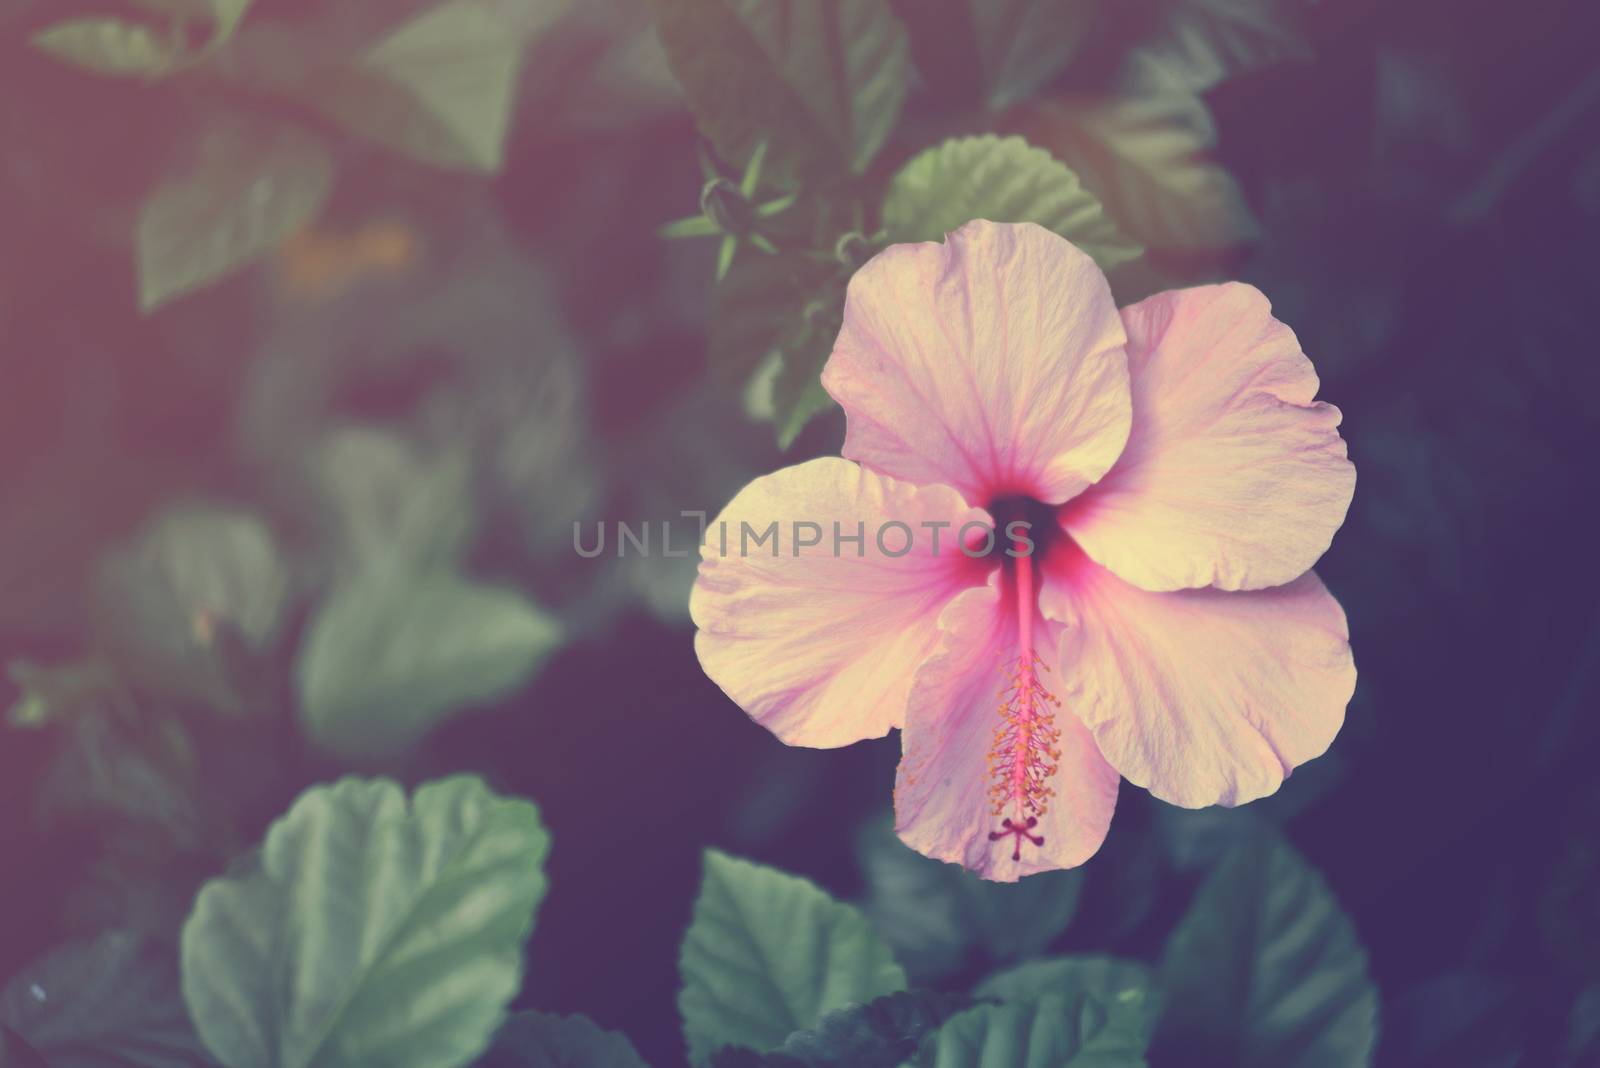 Vintage hibiscus pink flower close up. Retro soft color effect hipster picture.